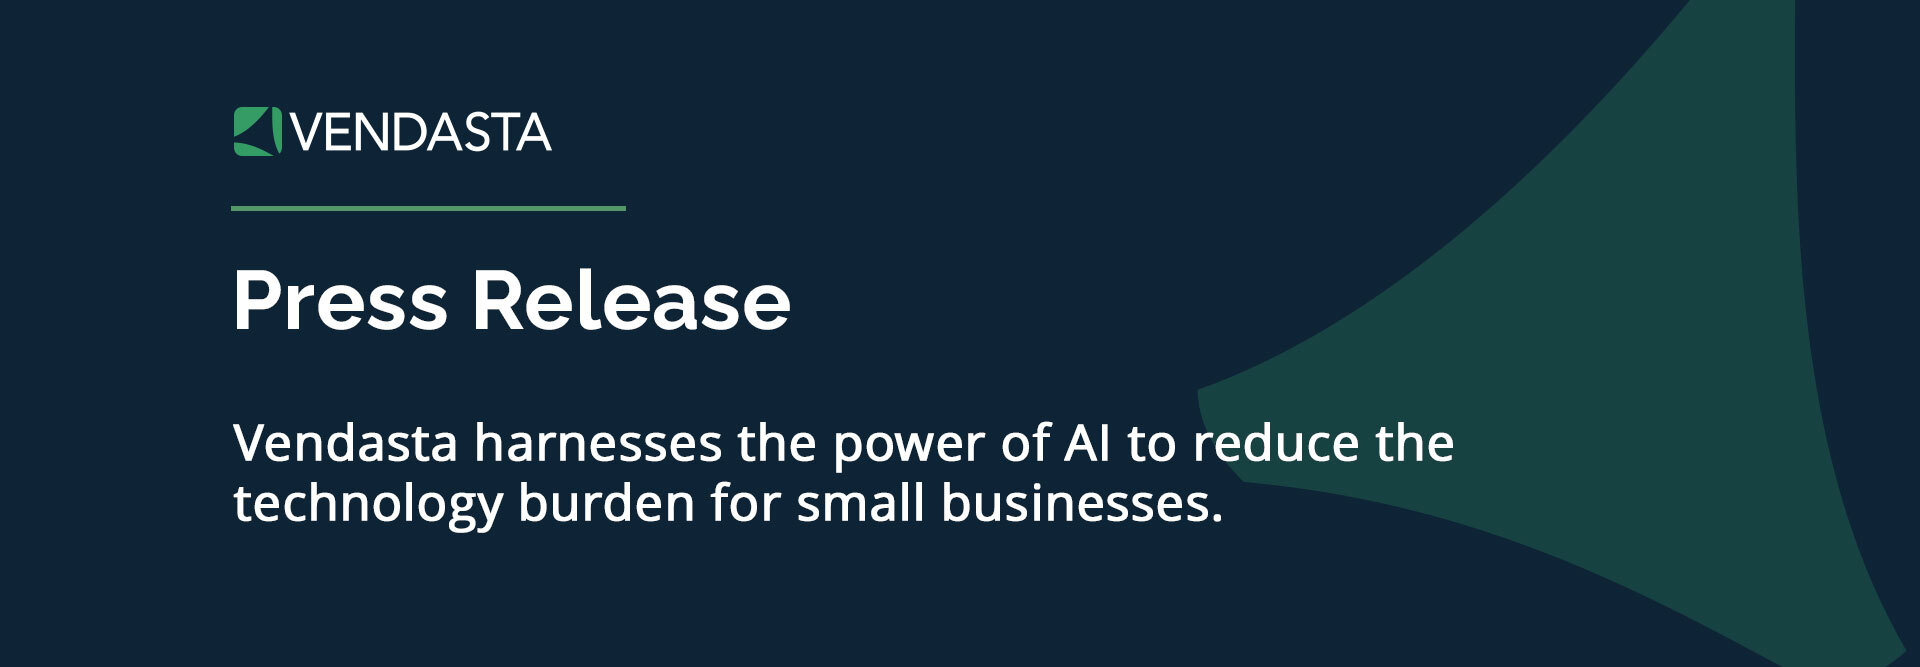 Vendasta harnesses the power of AI to reduce the technology burden for small businesses